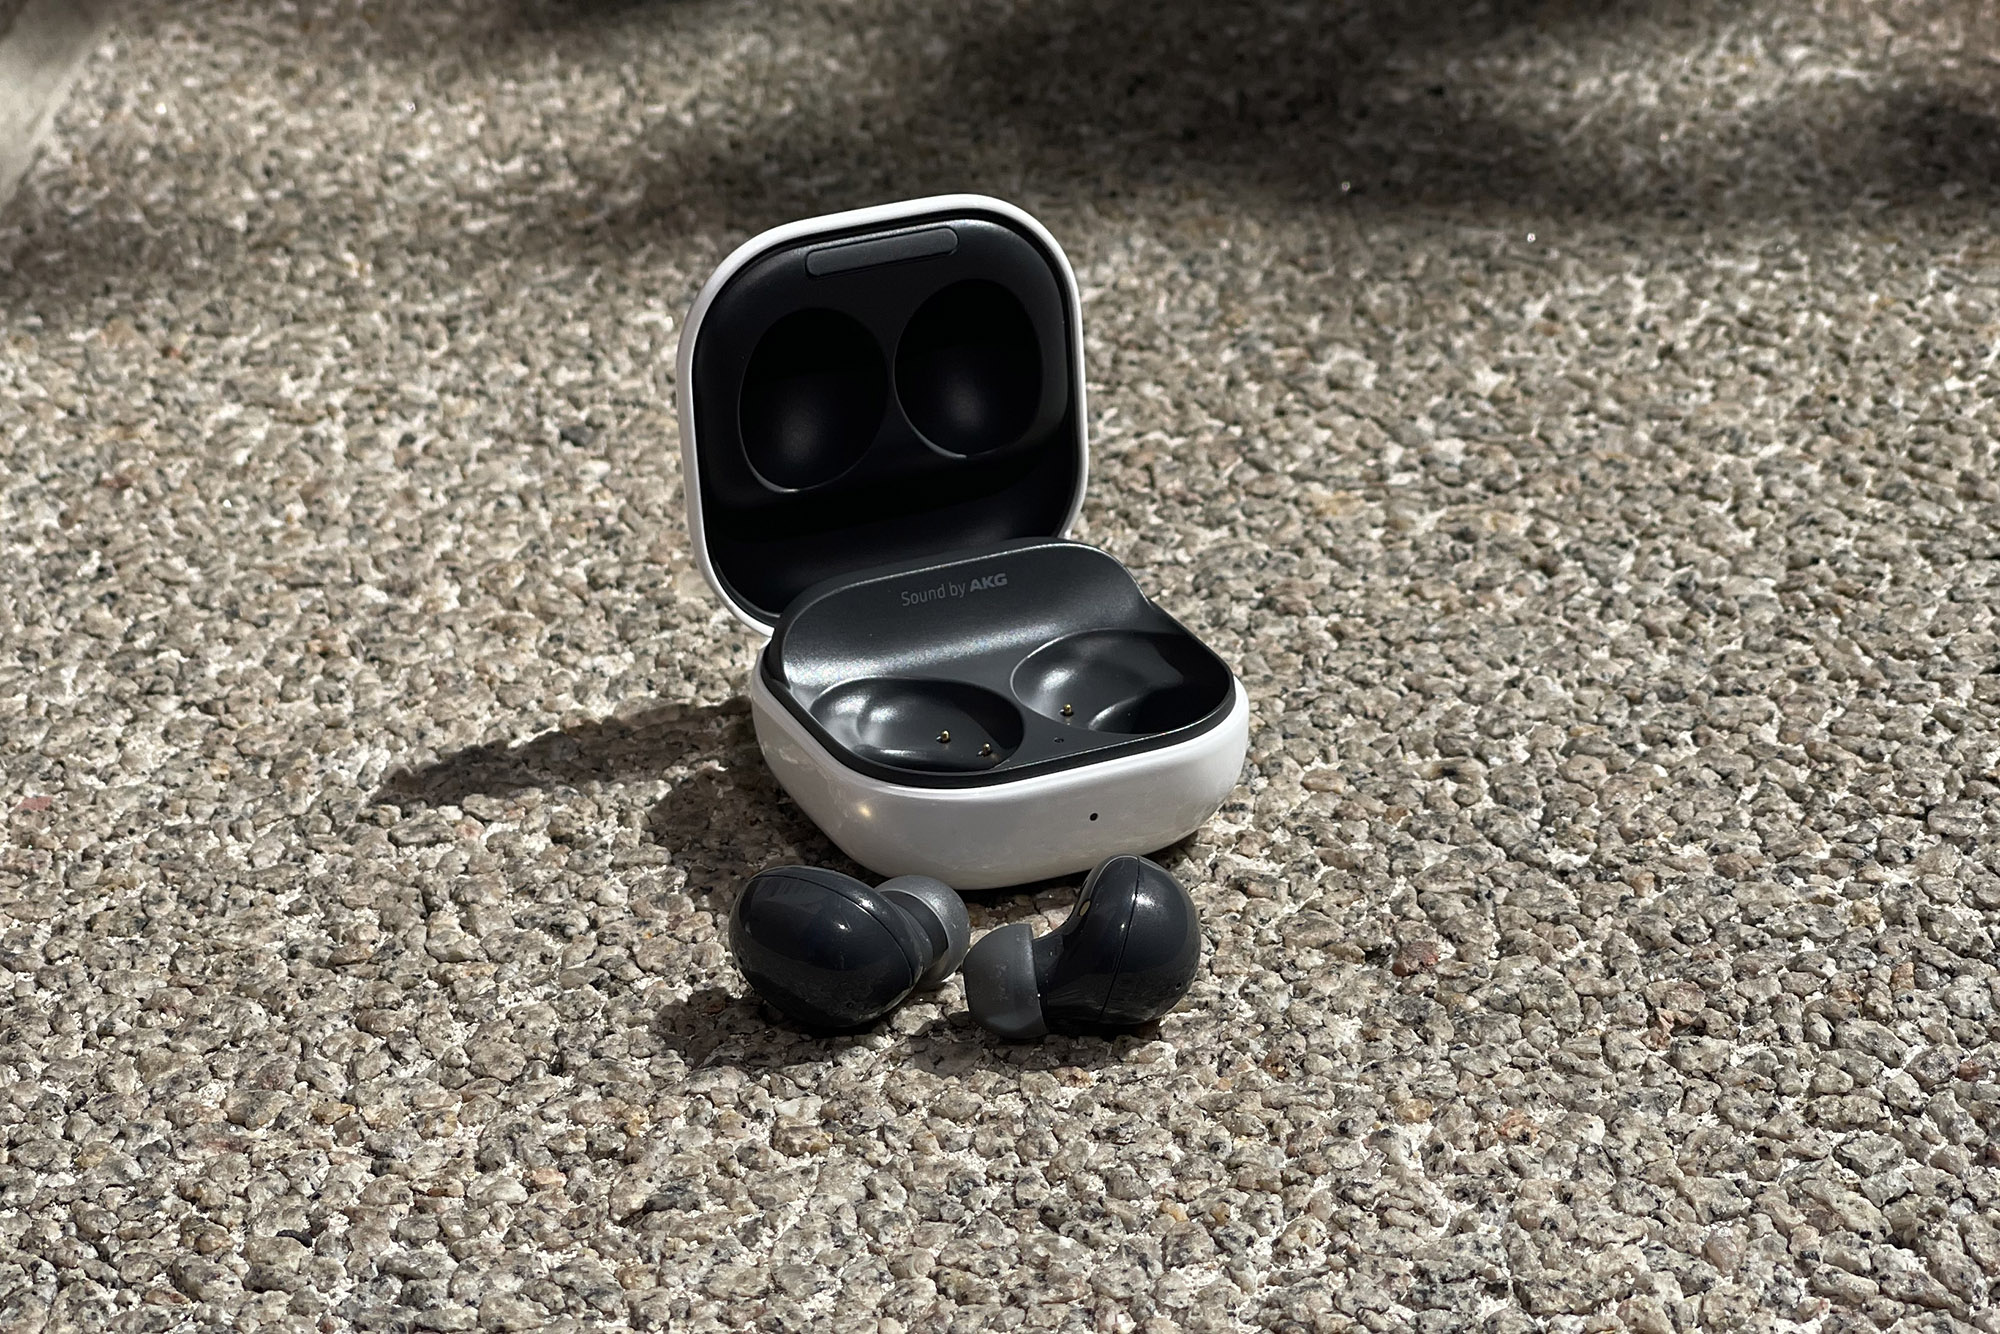 Galaxy Buds 2 bring ANC to Samsung's most affordable true wireless earbuds